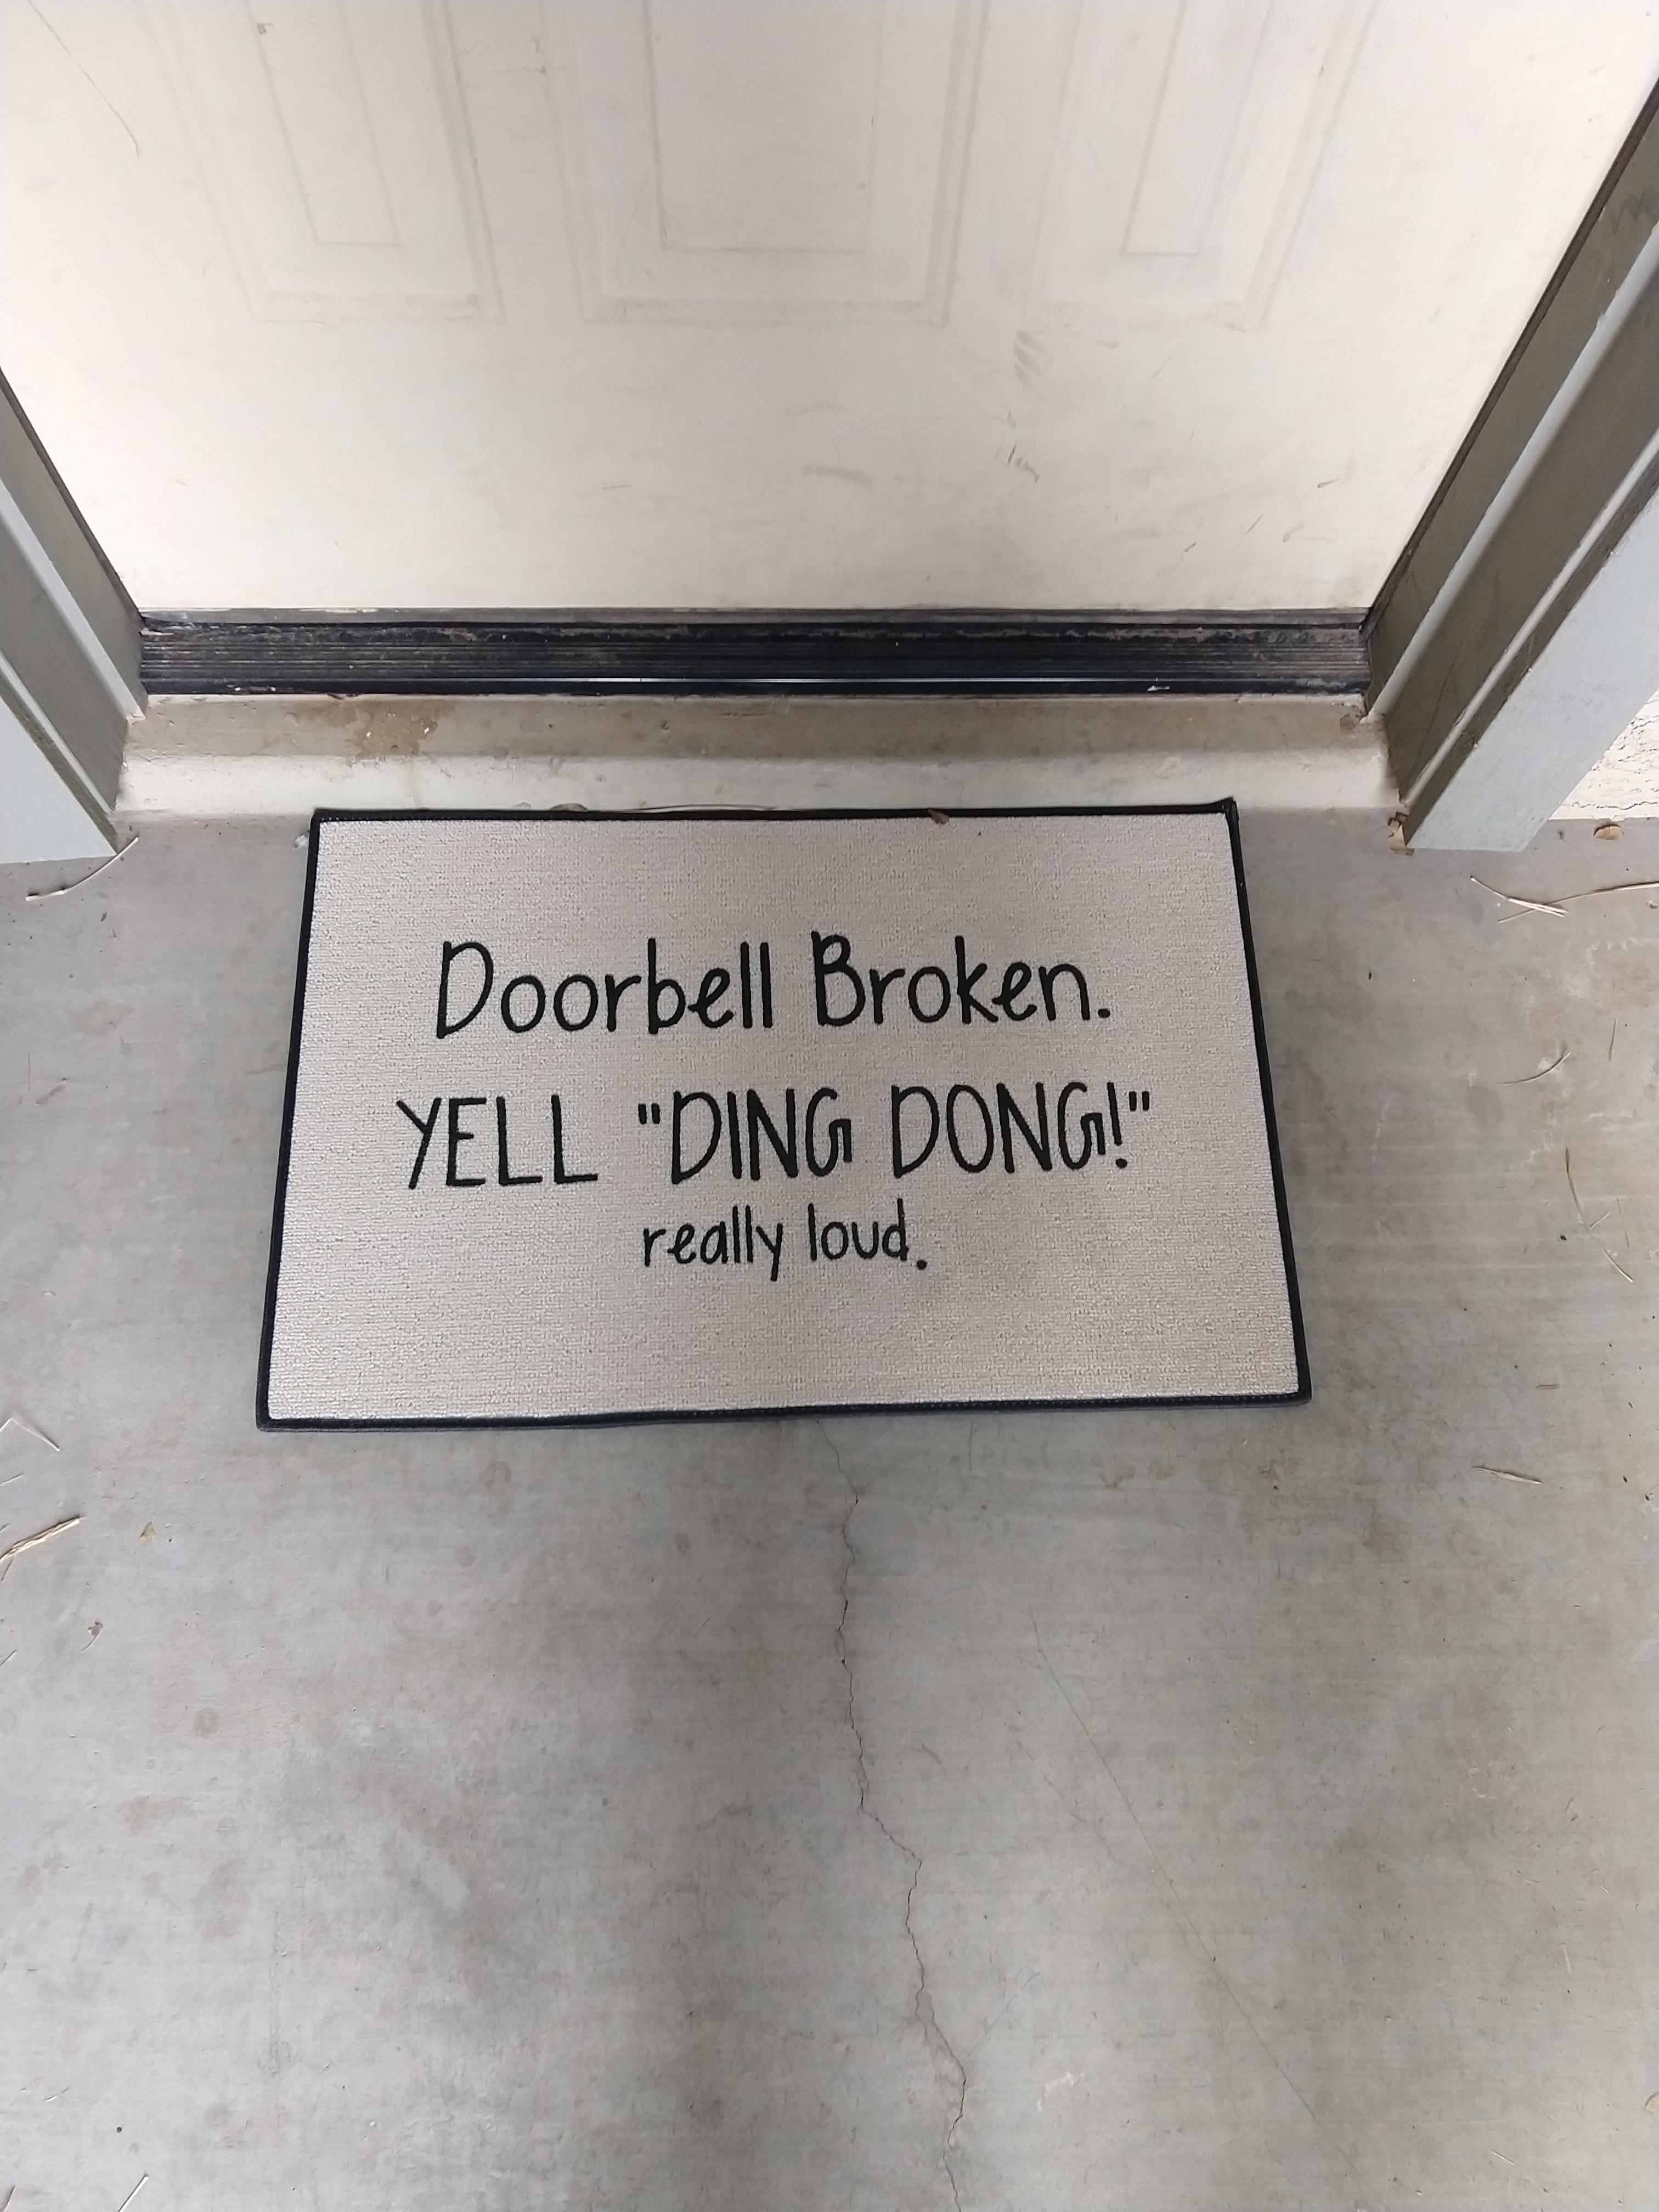 New door mat... Hoping the Amazon delivery people can follow directions.